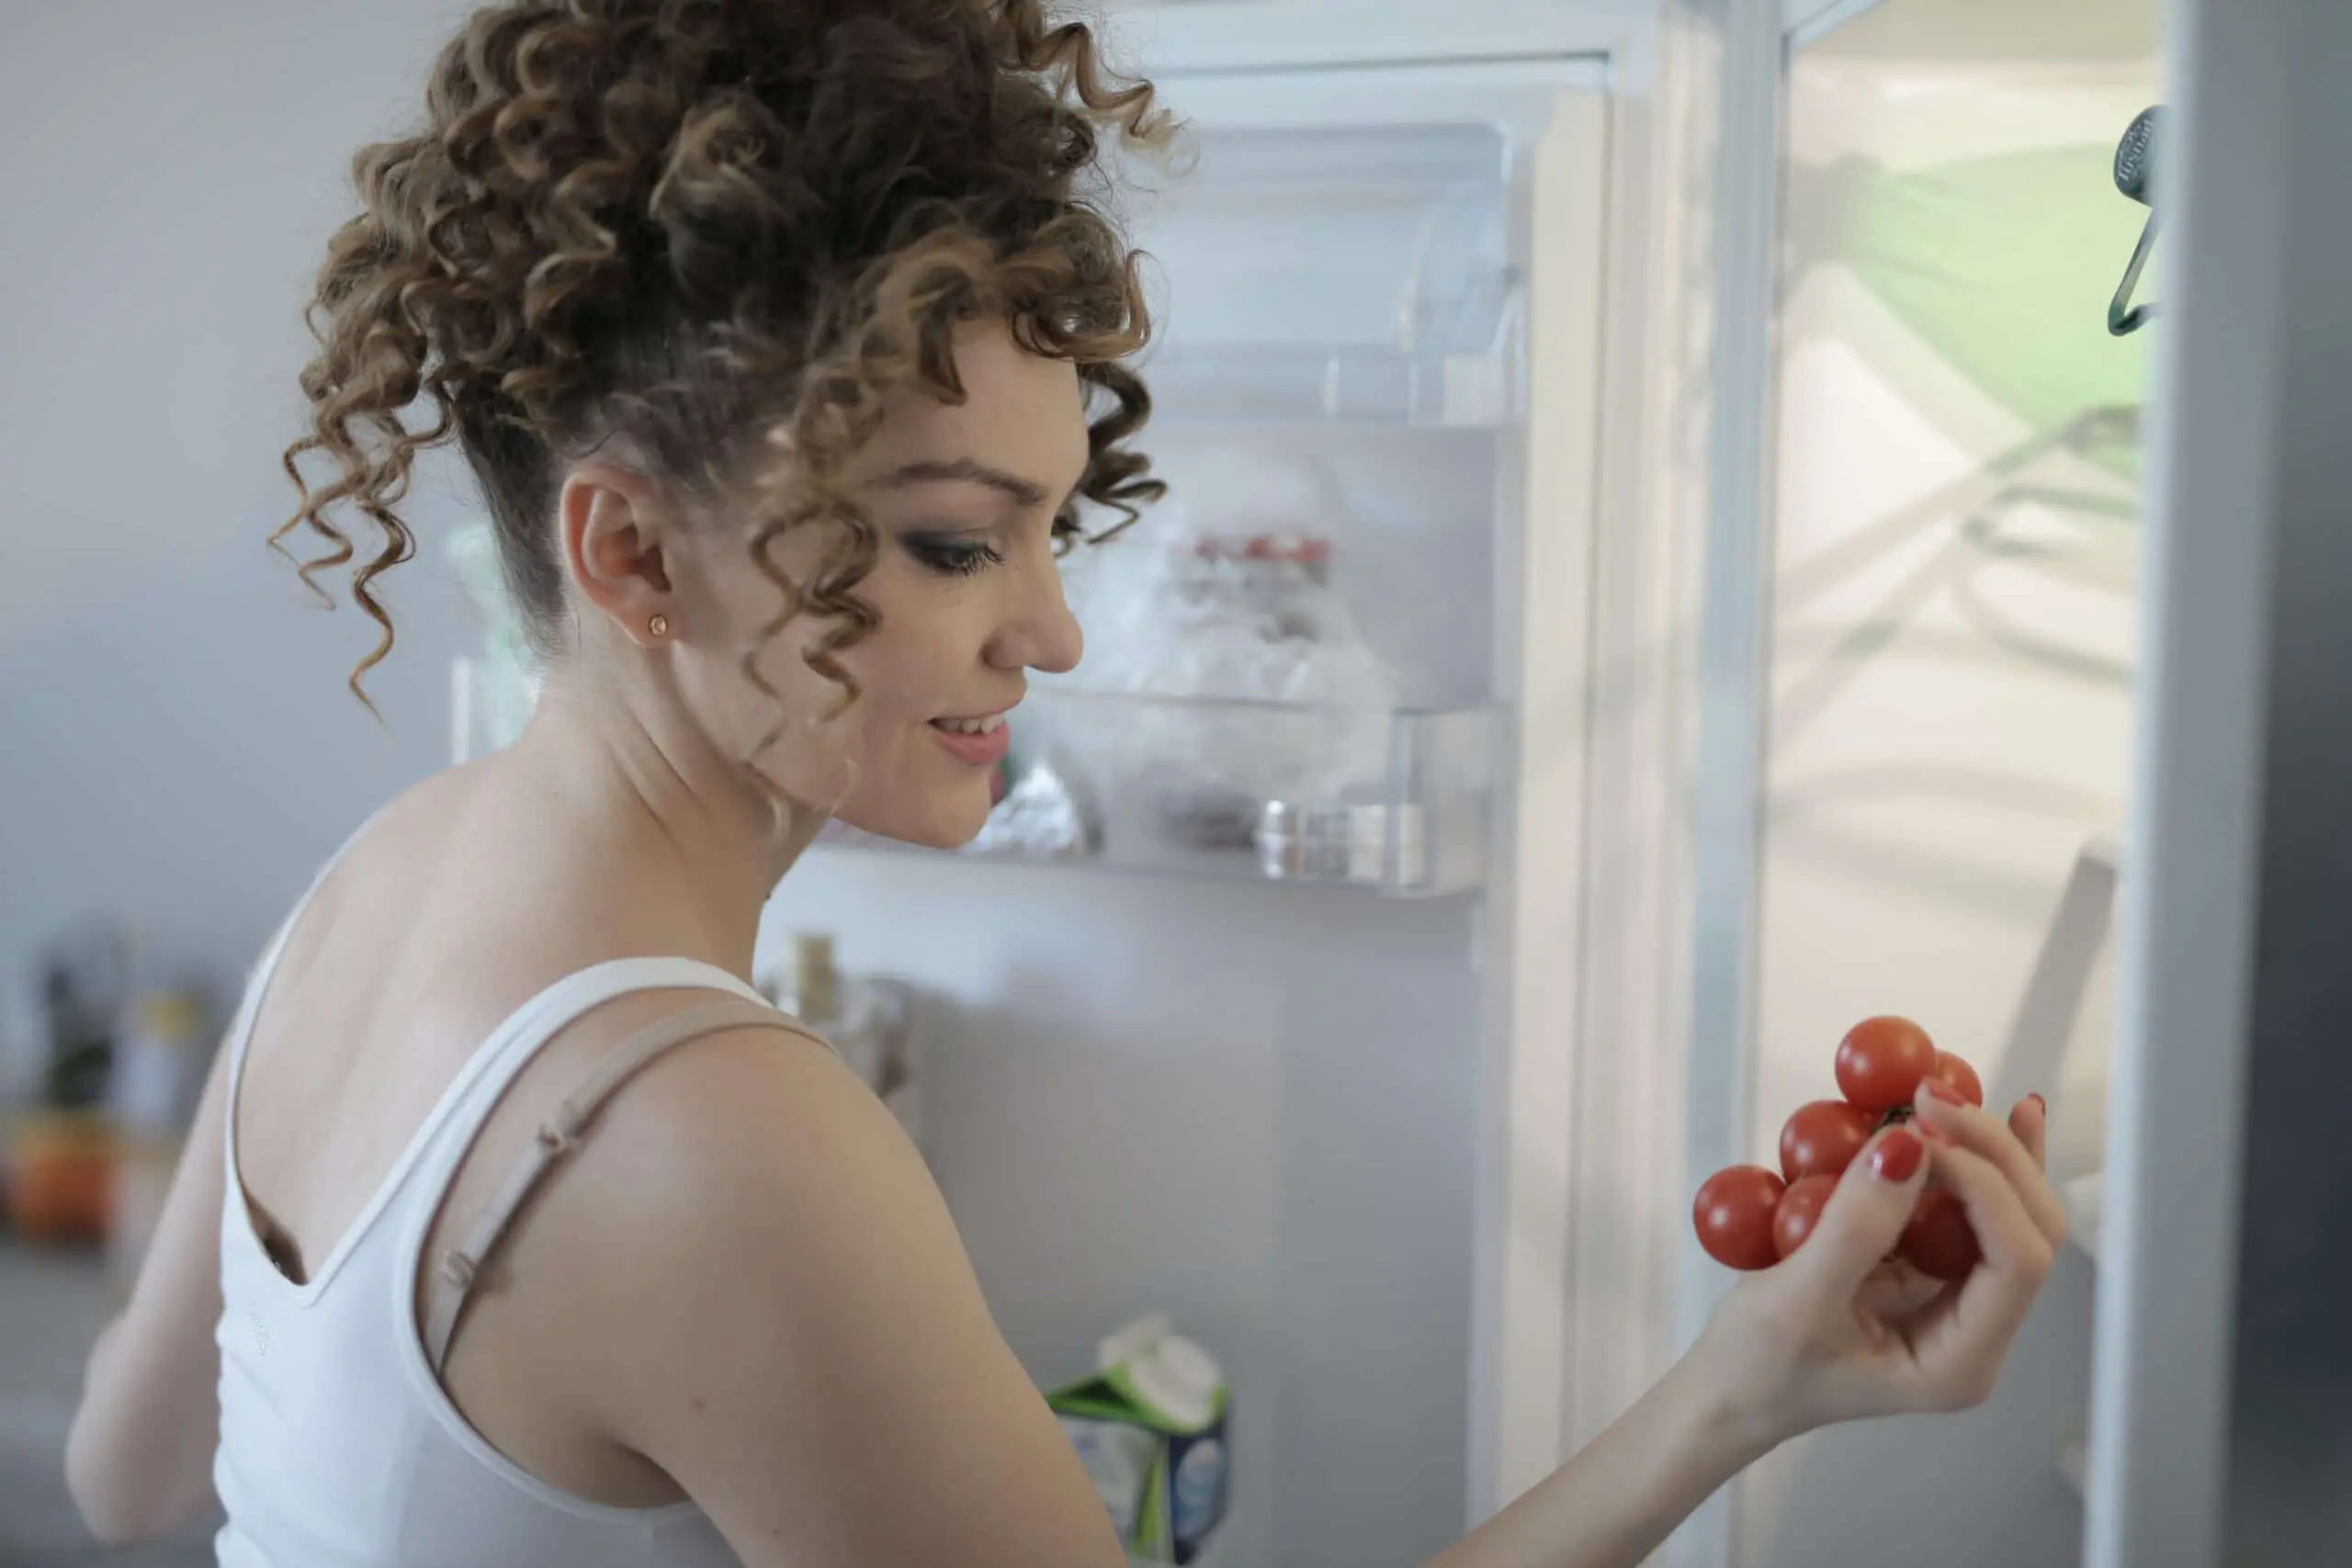 Woman looking at tomatoes in fridge scaled